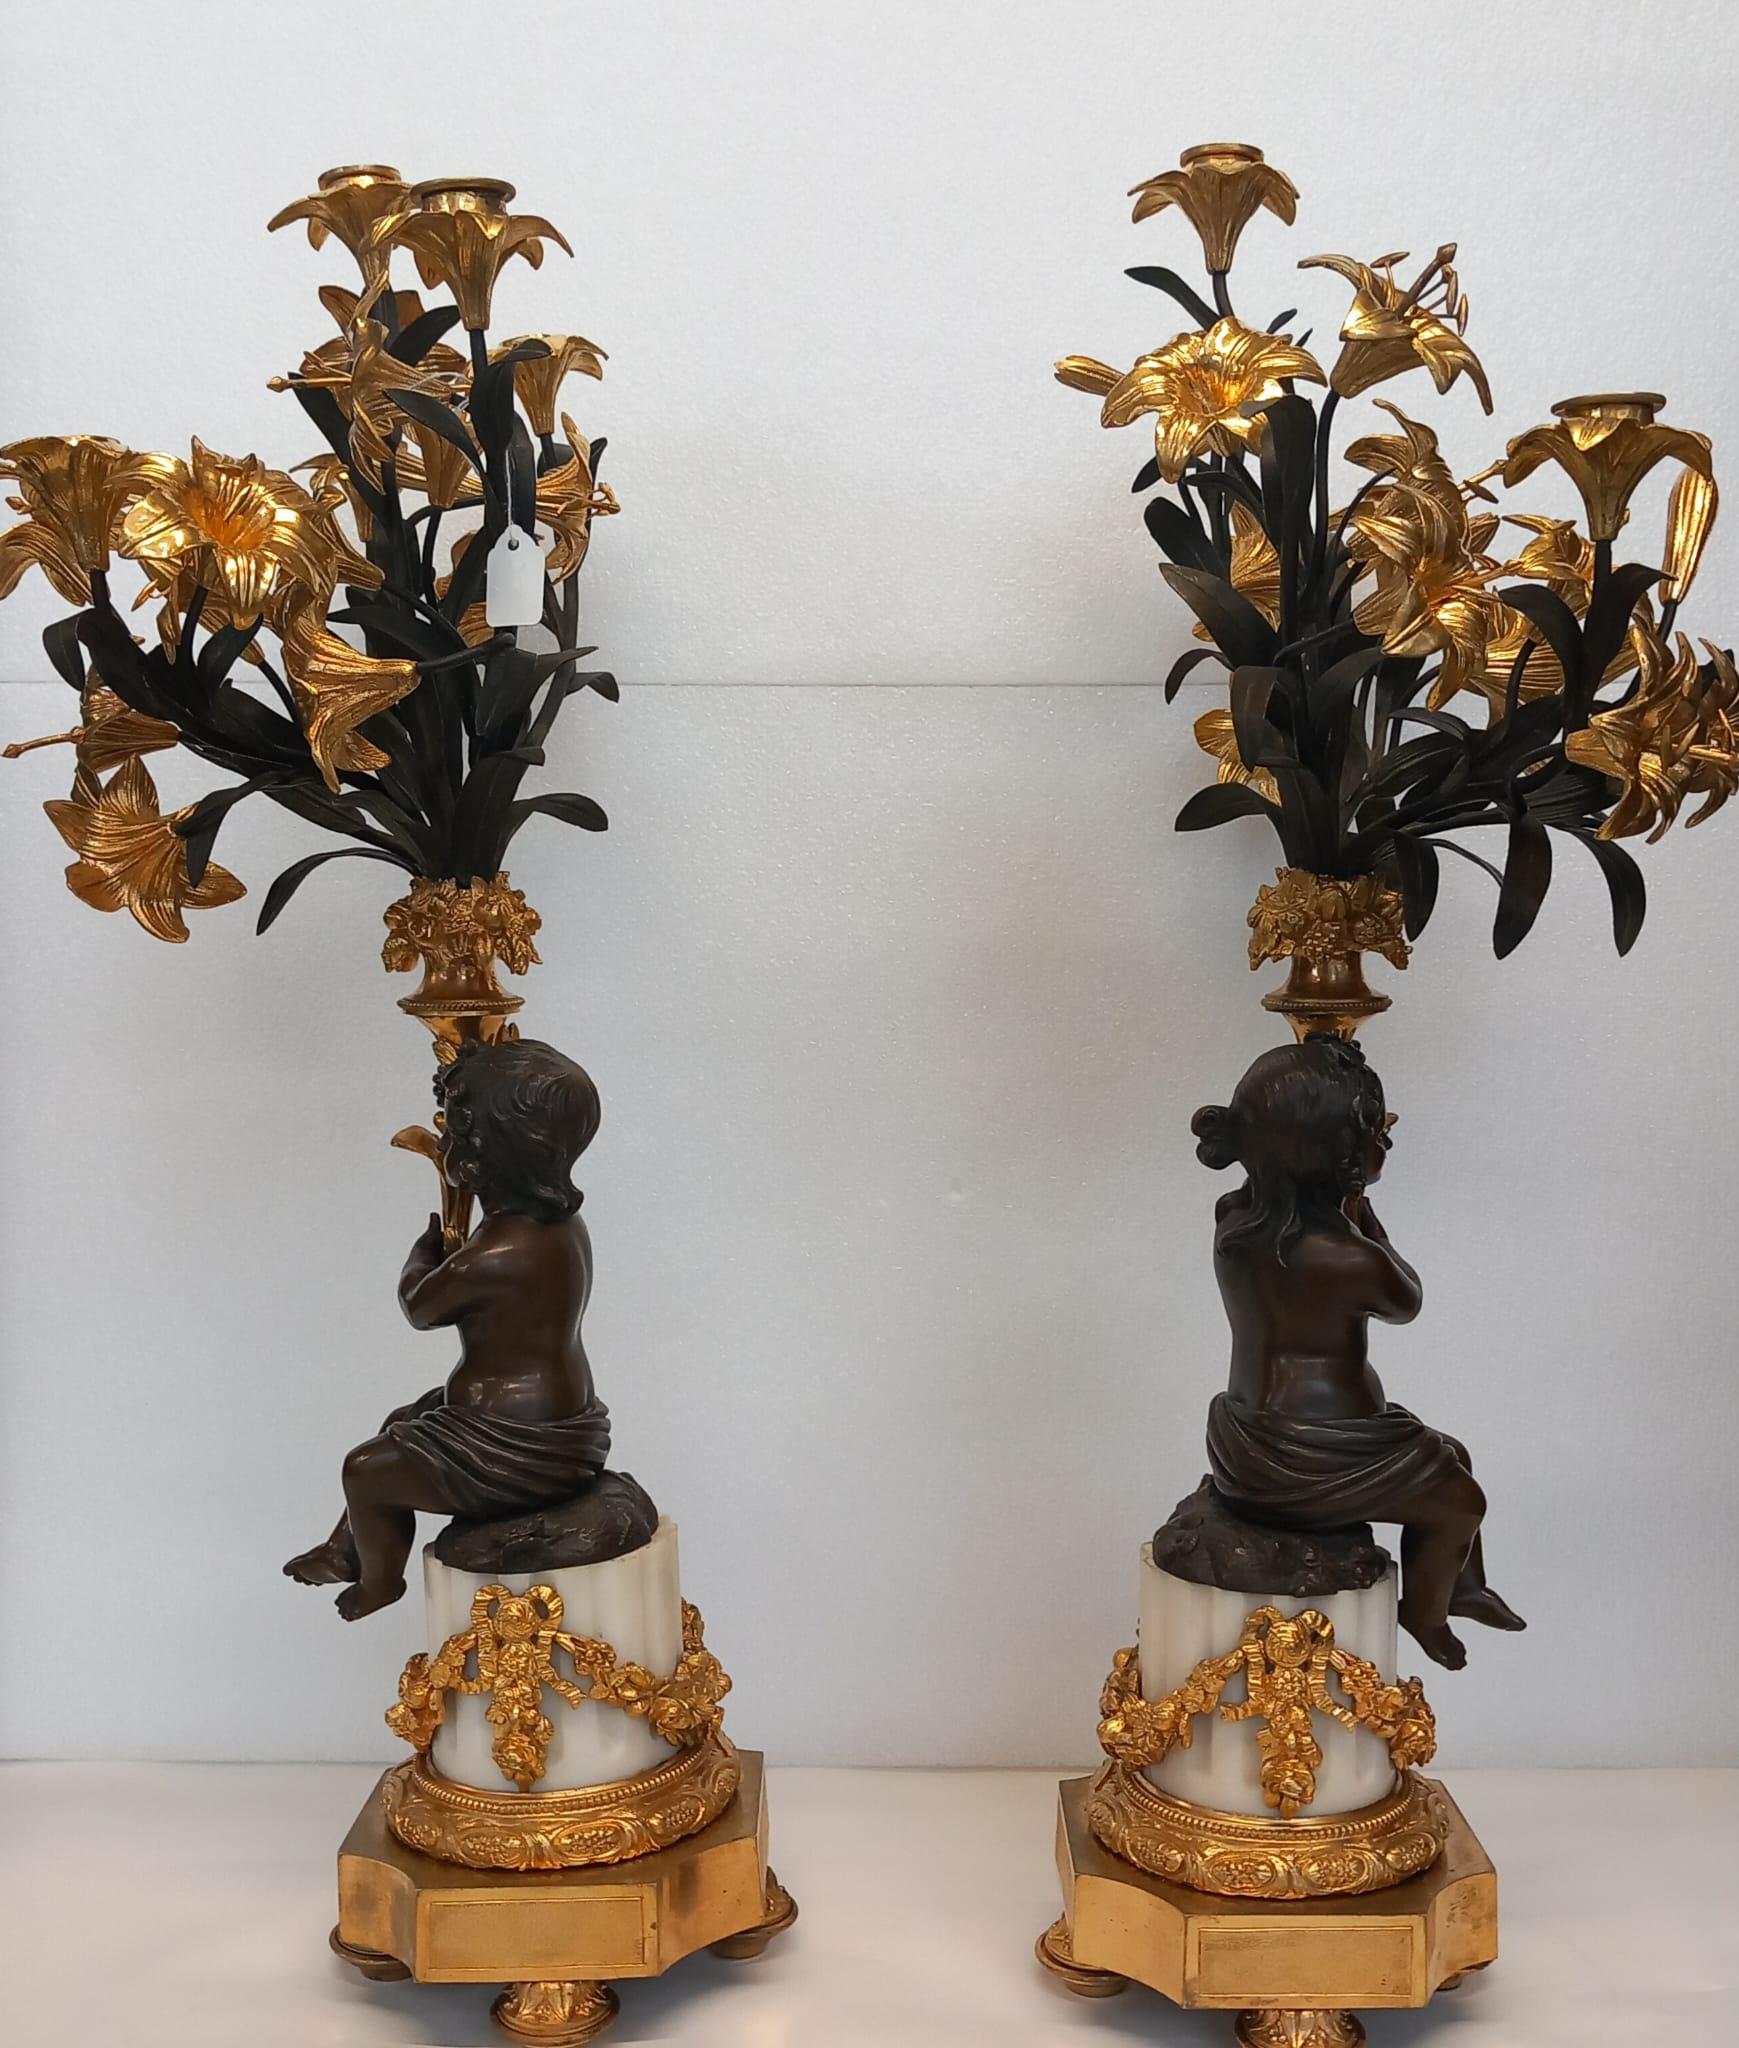 A large antique pair of French neoclassical candelabra in dark and gilt bronze depicting a young boy and a girl sitting on a white marble column, each holding a cornucopia of gilt tiger lilies with 5 candle holders on each. 
The gilt bronze bases